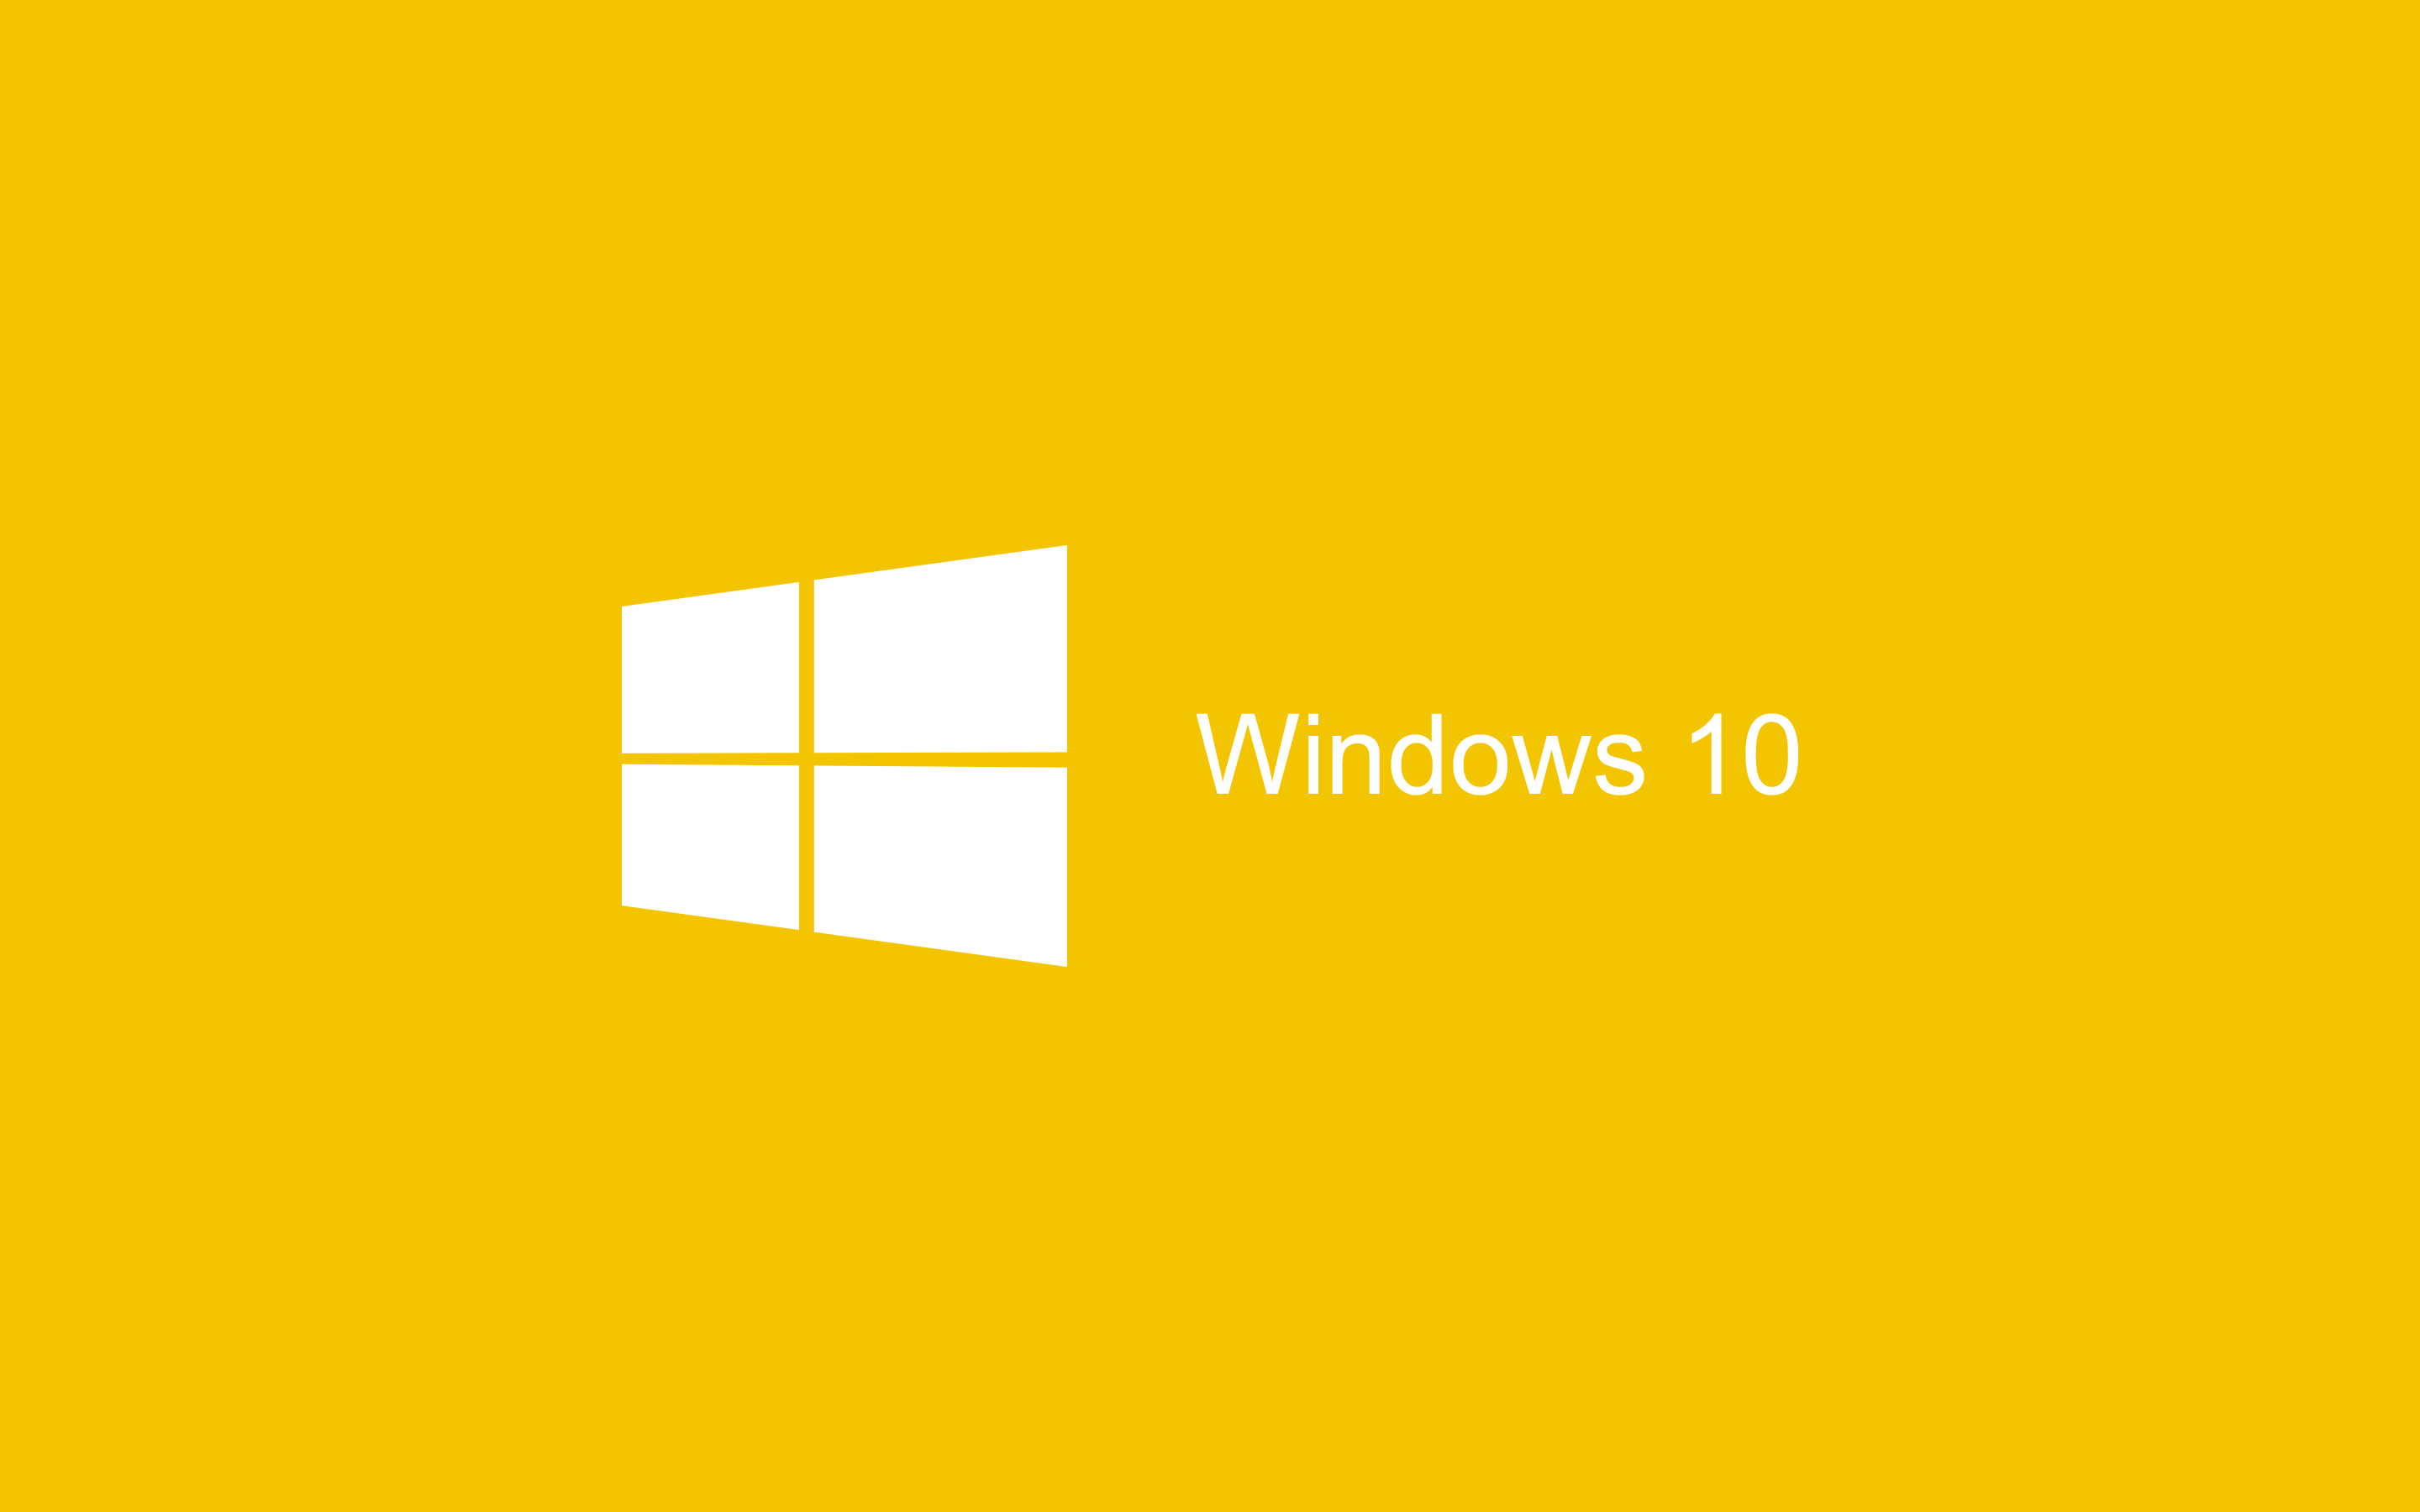 Windows Wallpaper With Only A Logo Of On The